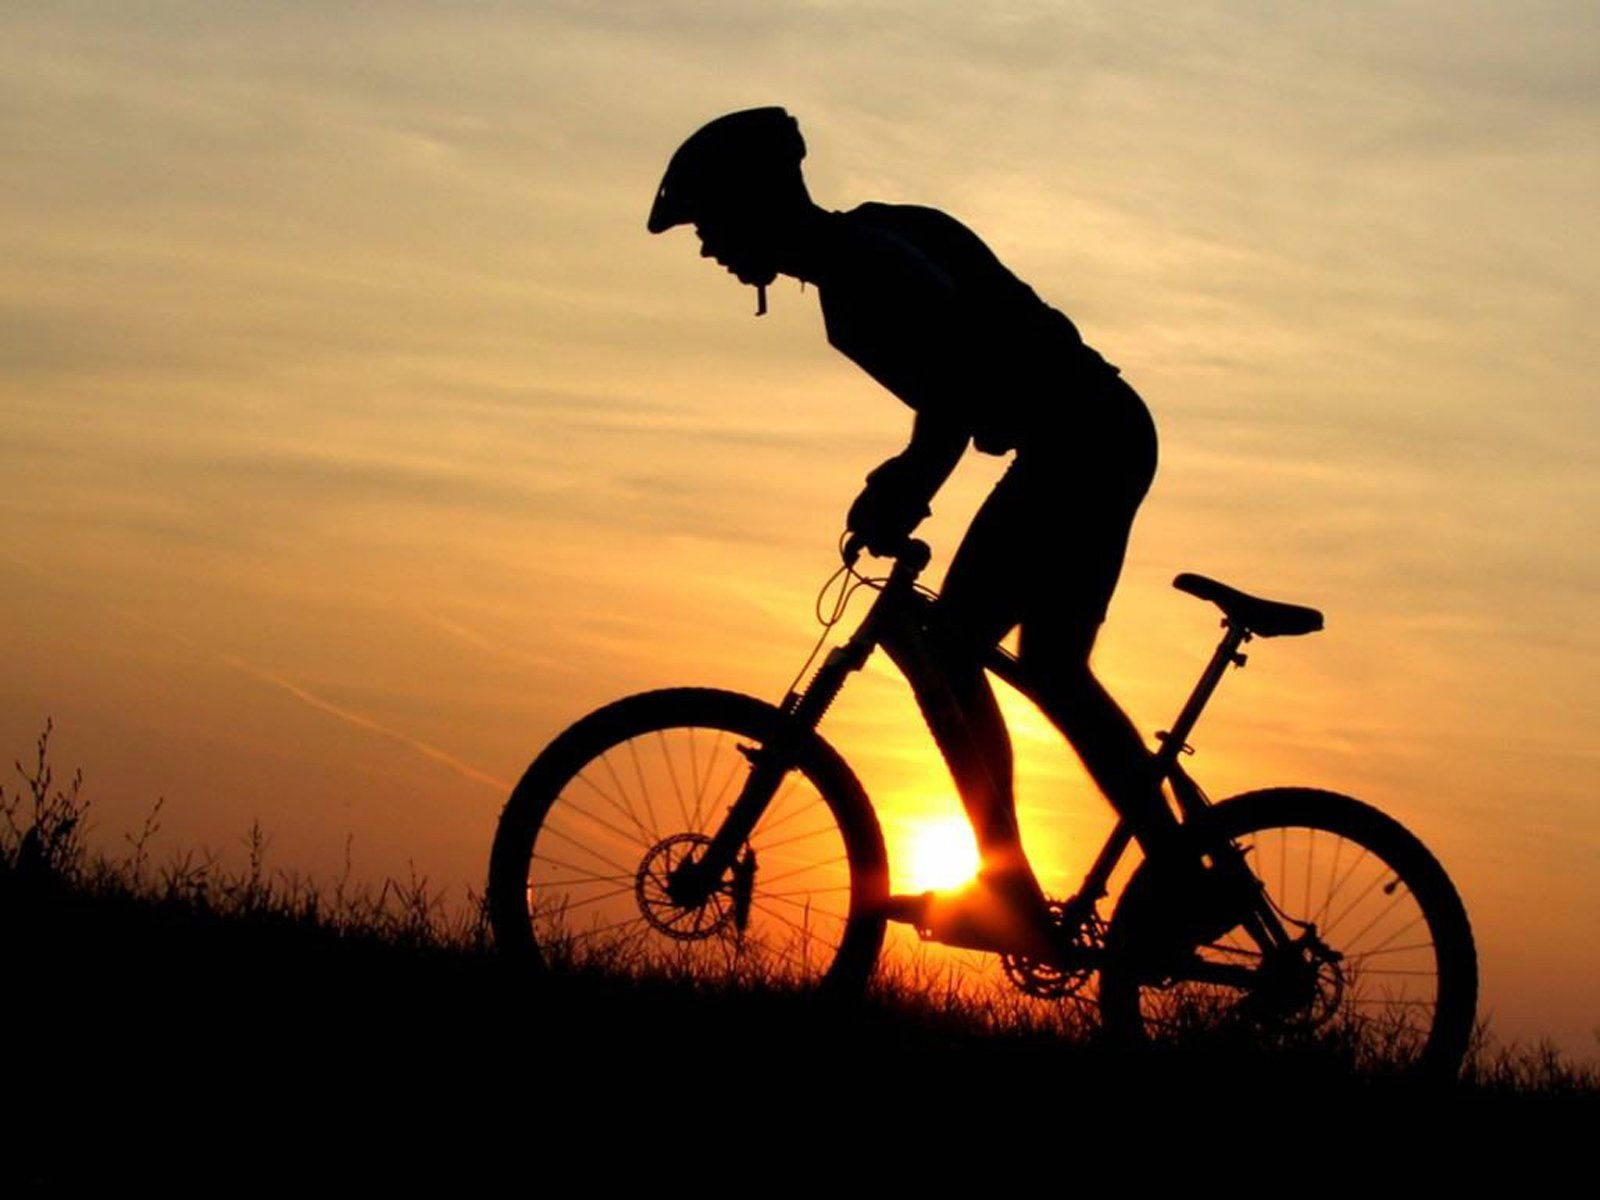 Cyclist On Bike Silhouette At Sunset Wallpaper